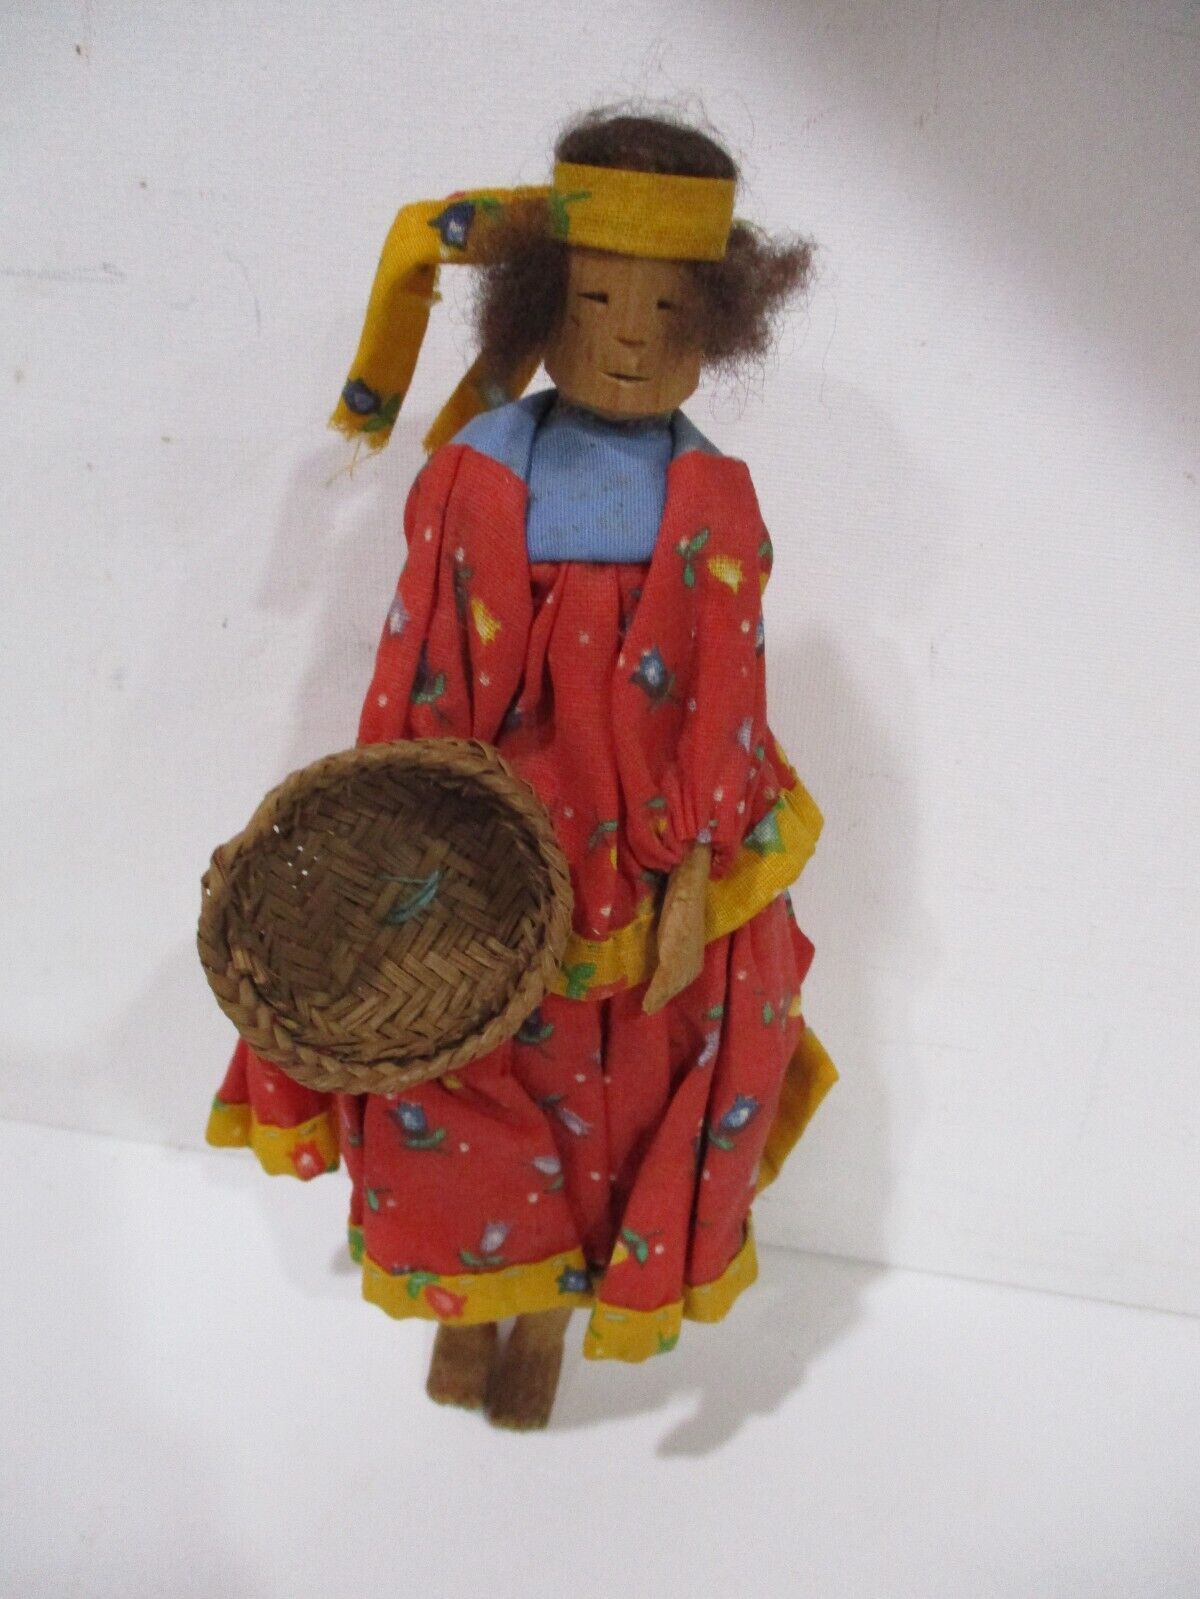 TARAHUMARA Indian Dolls Hand Carved Wood with Basket- Indian Art Mexico